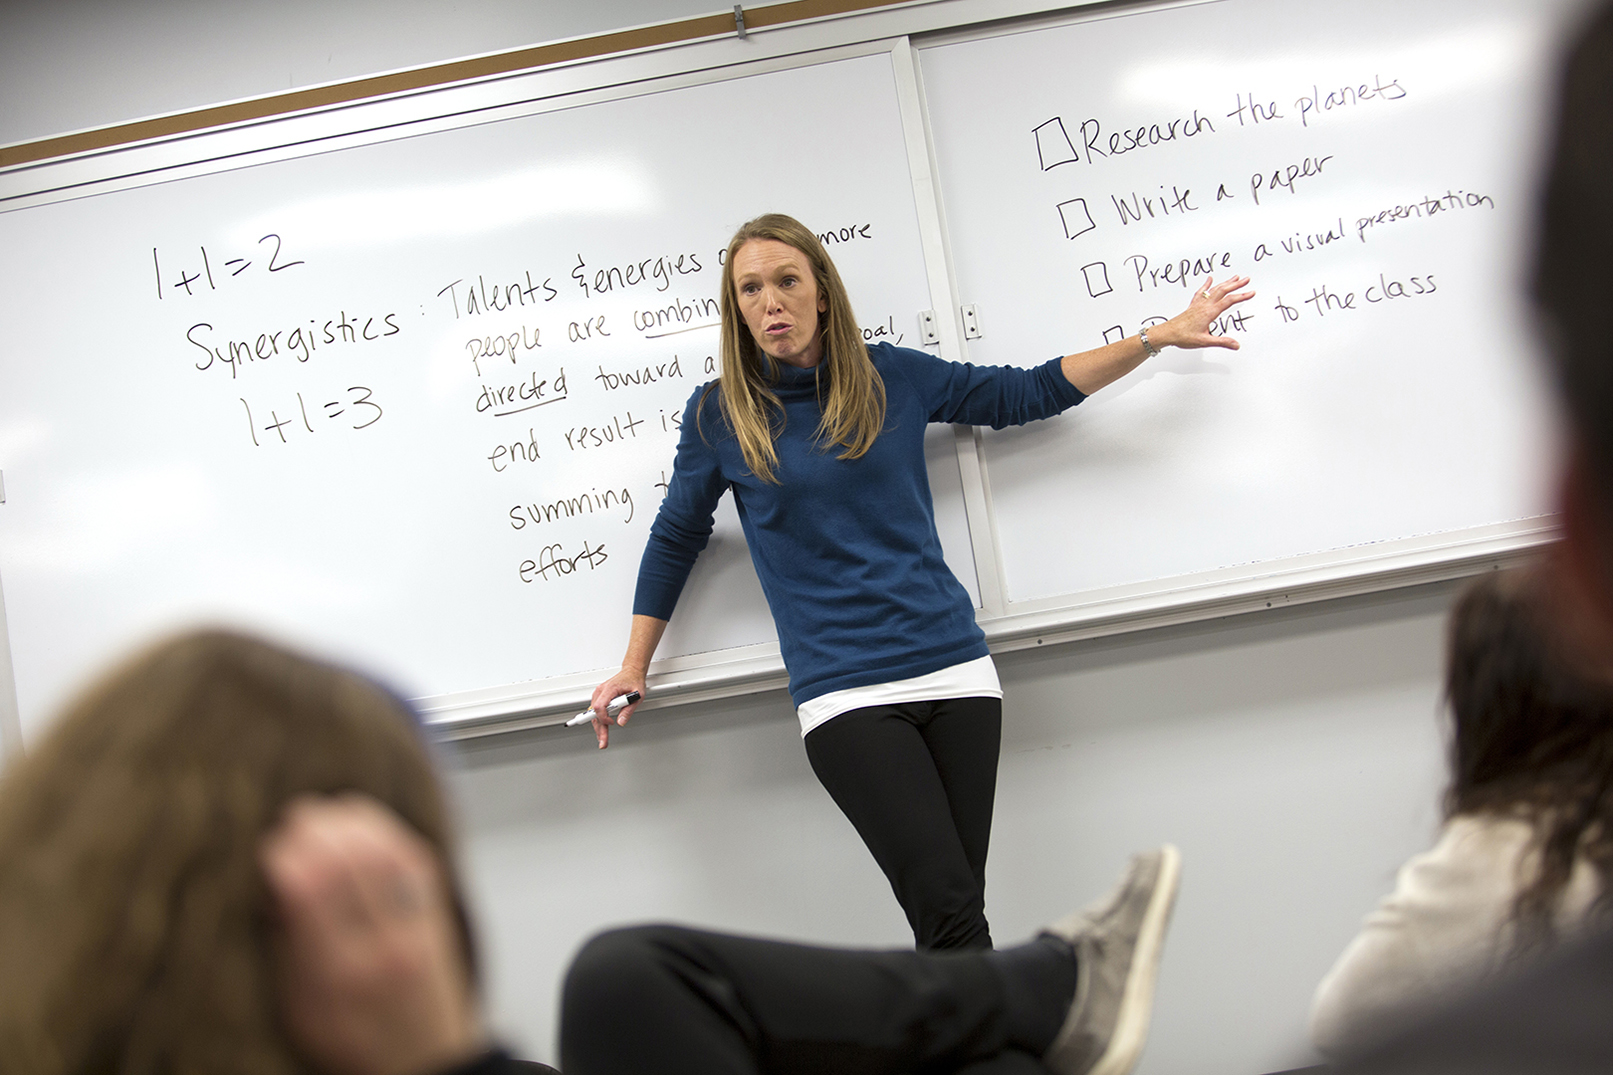 Lindsay Hastings, a professor in the Department of Agricultural Leadership, Education and Communication, stands in front of a whiteboard.